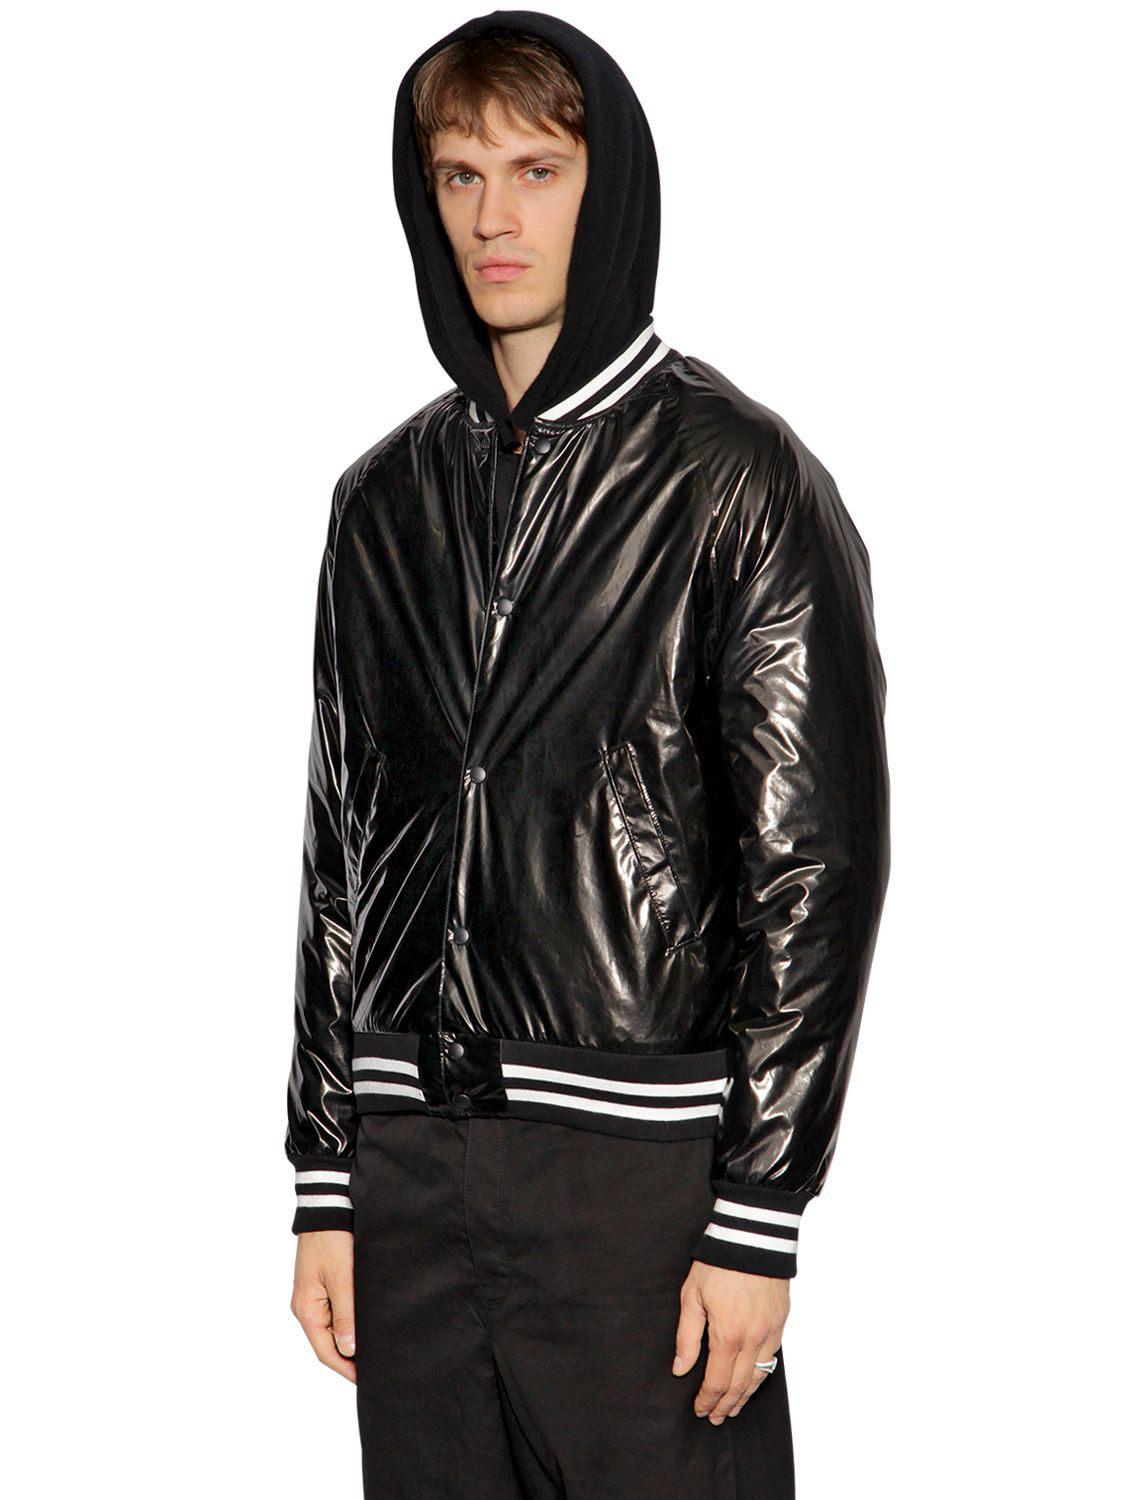 RTA Synthetic Logo Embroidered Shiny Bomber Jacket in Black for Men - Lyst